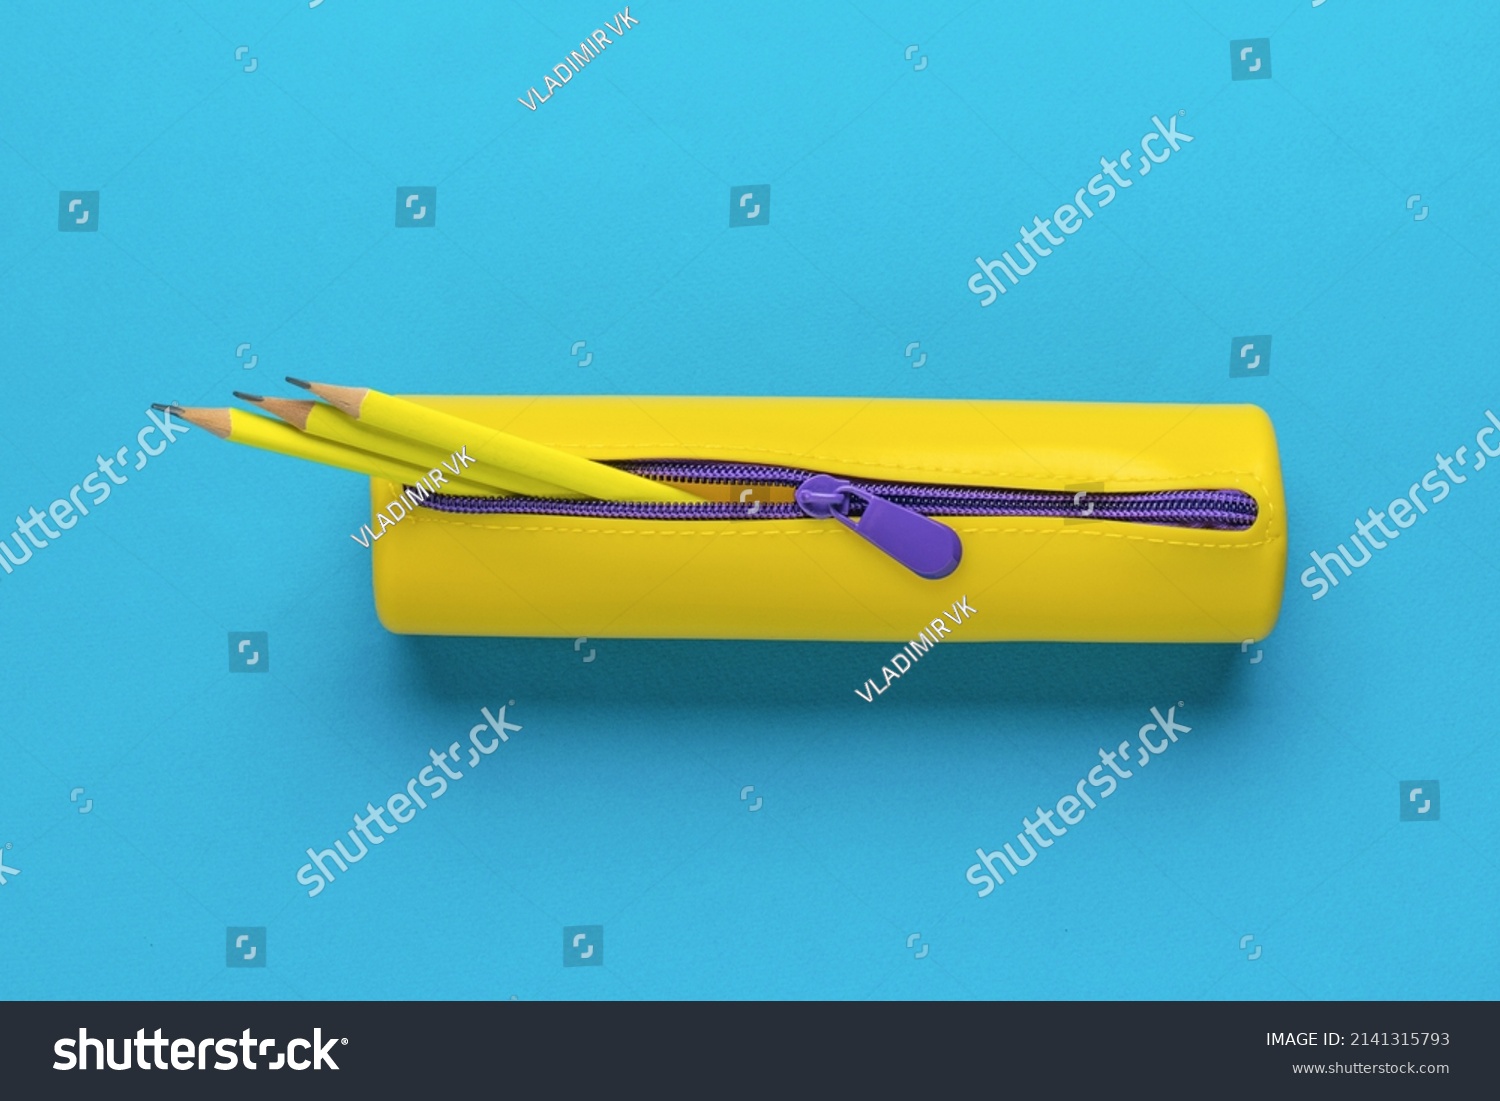 Yellow pencil case with three yellow pencils on a blue background. The minimum concept of storing school supplies. Flat lay. #2141315793